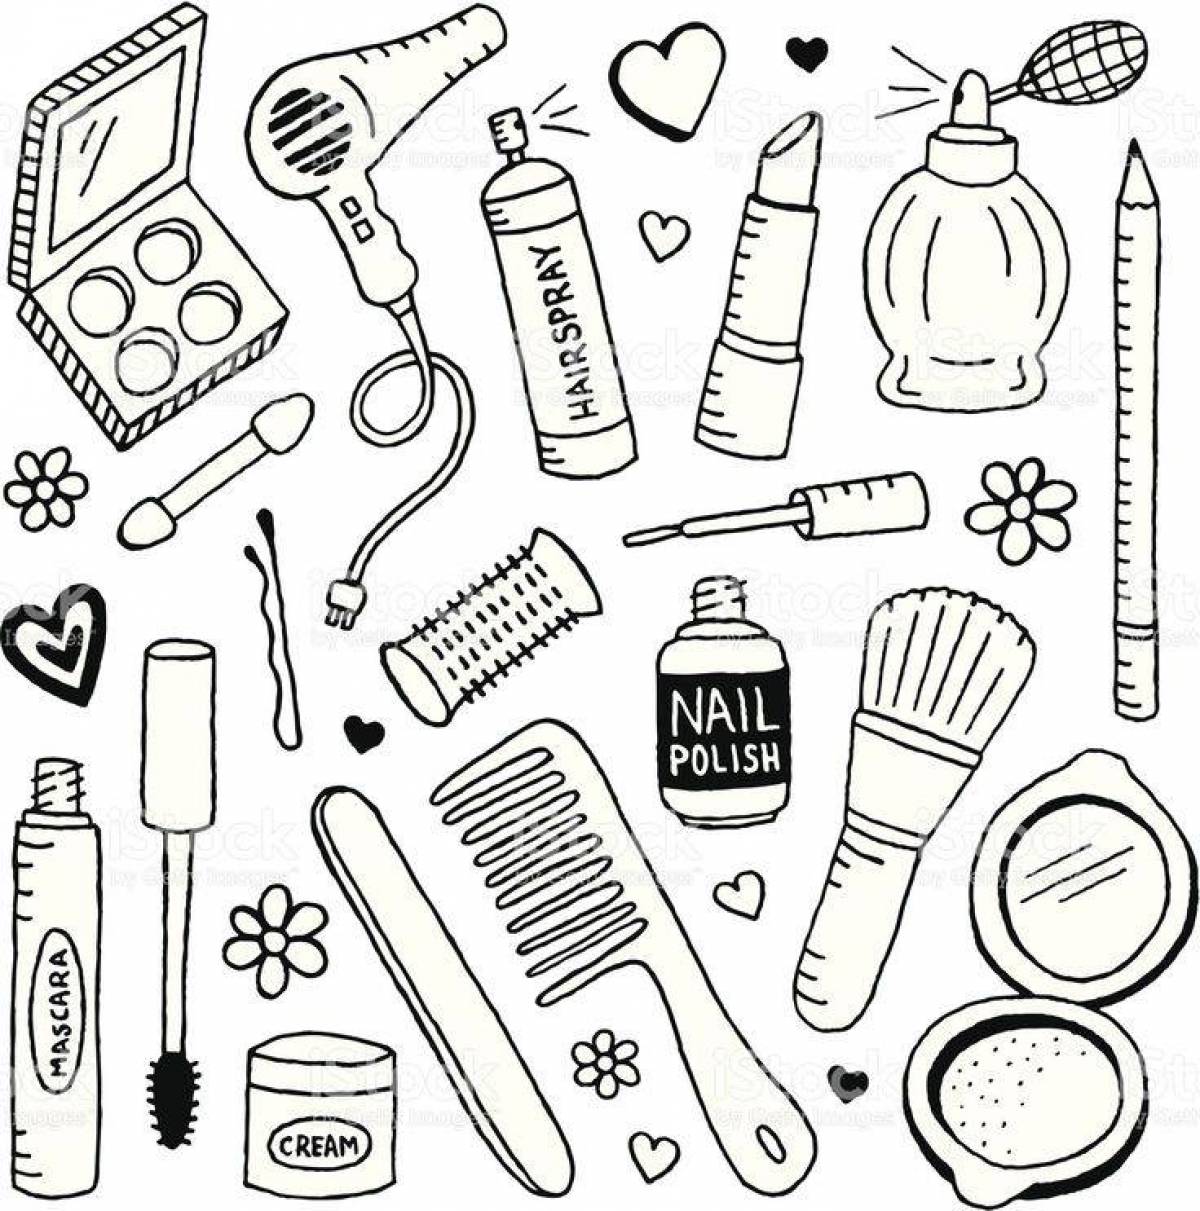 Coloring page playful cosmetics